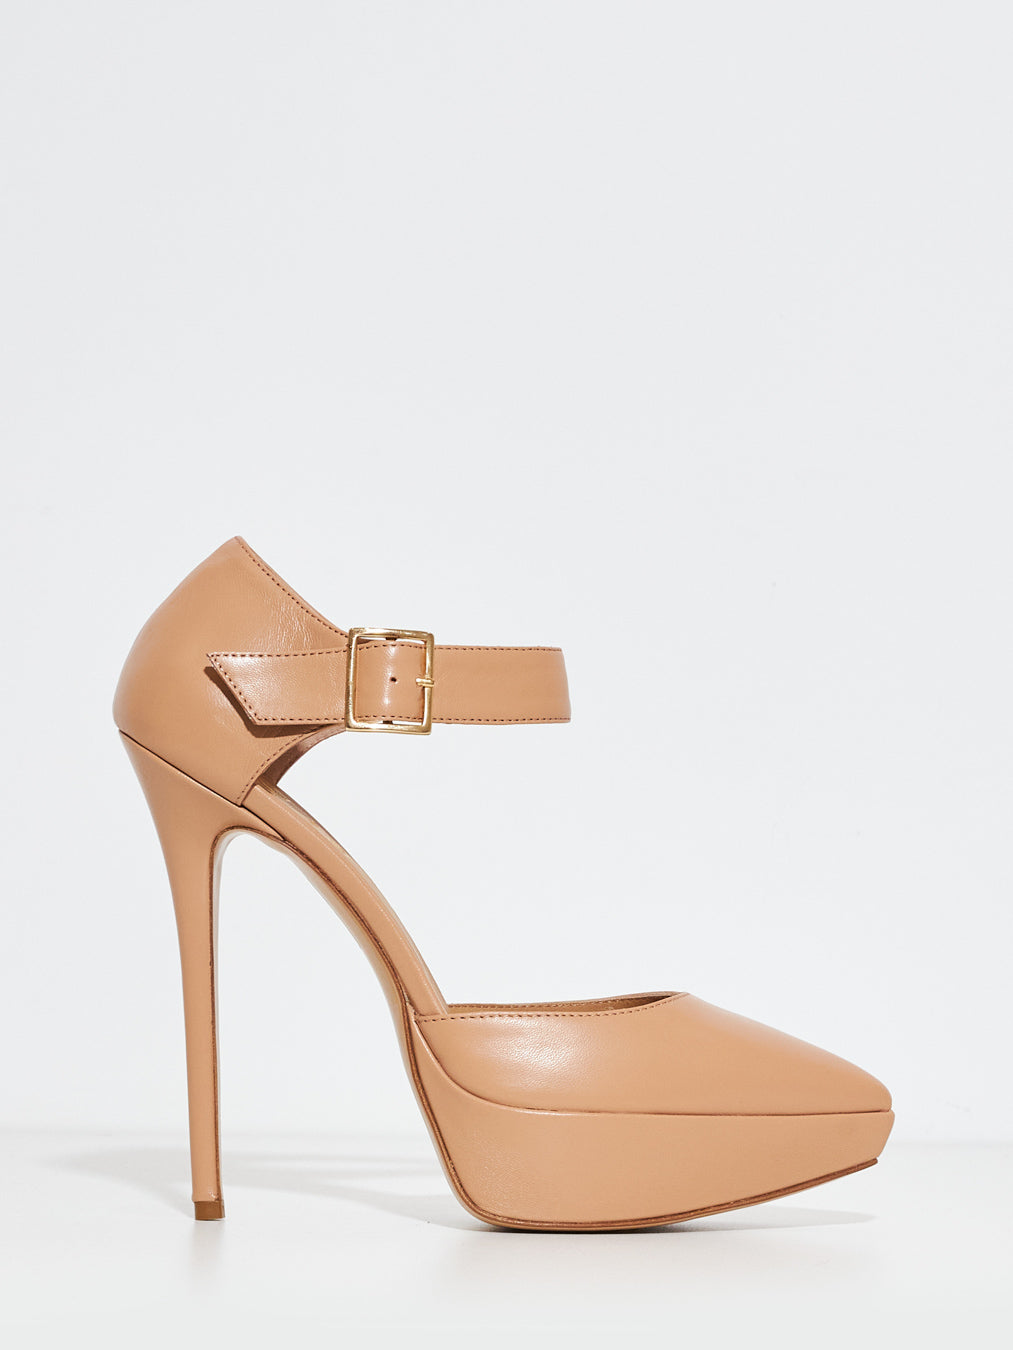 Wo Milano pumps with powder pink leather strap<br>